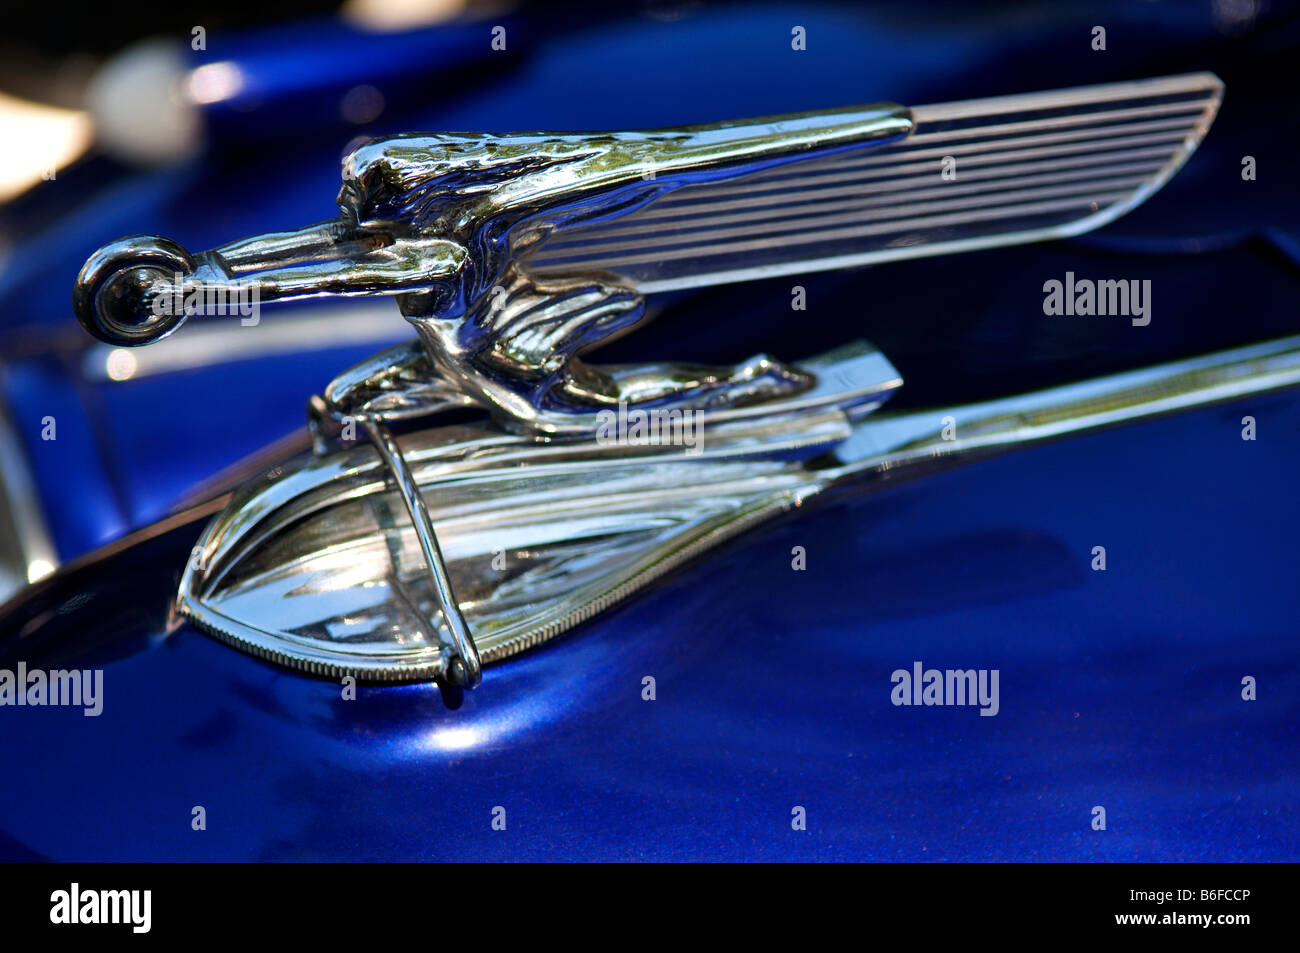 Hood ornament of a 1940 Packard at at Classic Car Show in Belvidere, New Jersey, USA Stock Photo